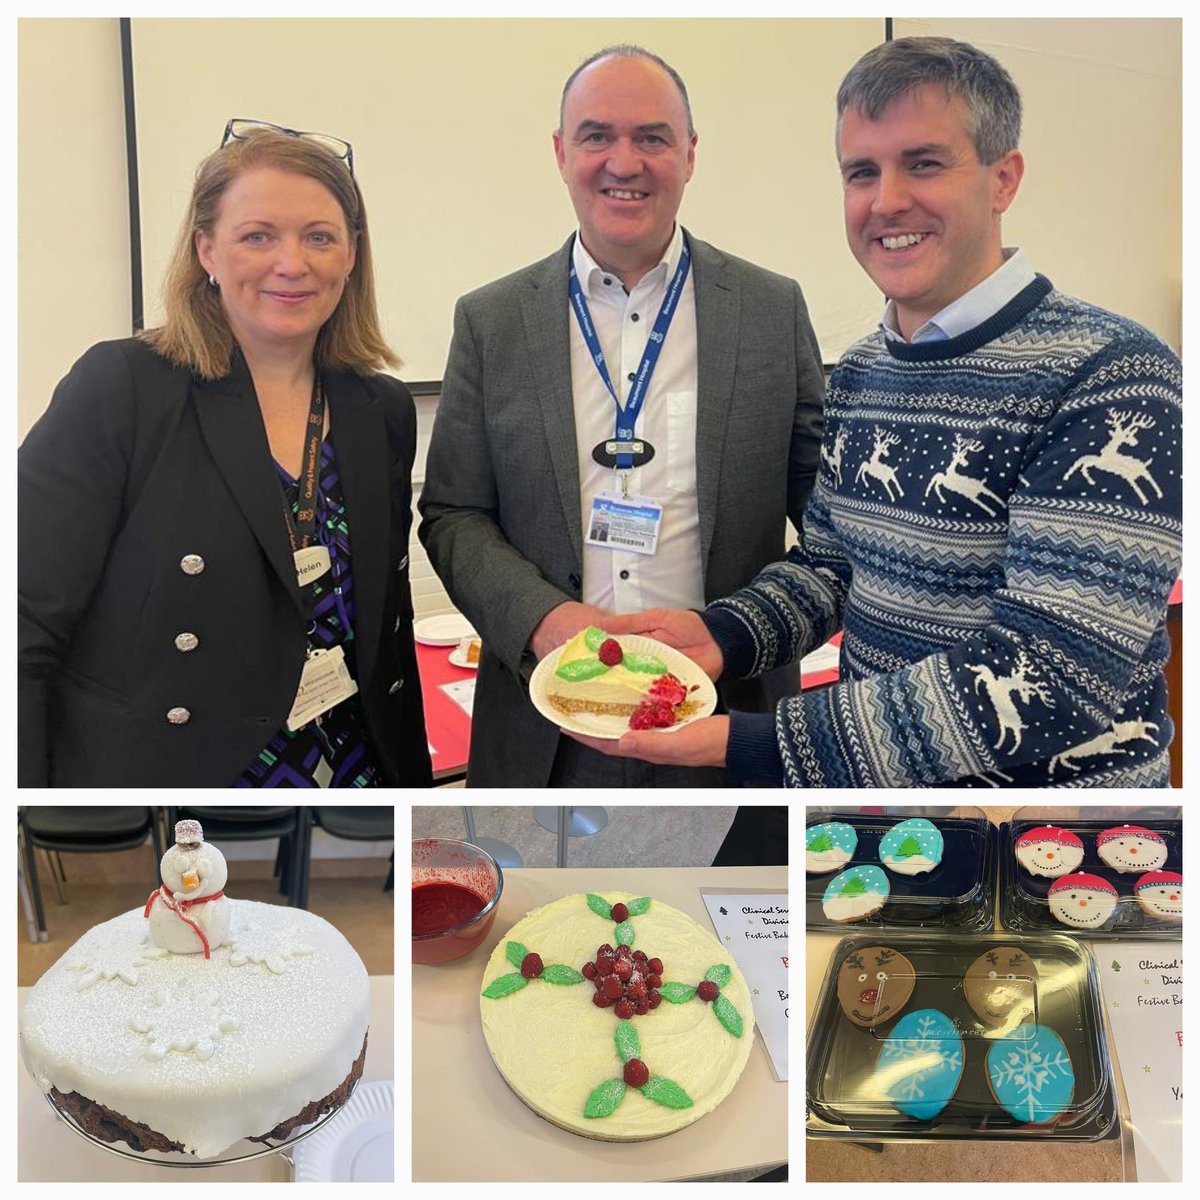 Eningineers & Physicists have many skills, but yesterday, 3 of our team showed their mastery of baking festive treats! Well done, Brian, David, Emma & all clinical services division bakers @Beaumont_Dublin 
@BeaumontDiet @OtBeaumont @socworkbeaumont @Beaumont_SLT @BHPhysioCPD